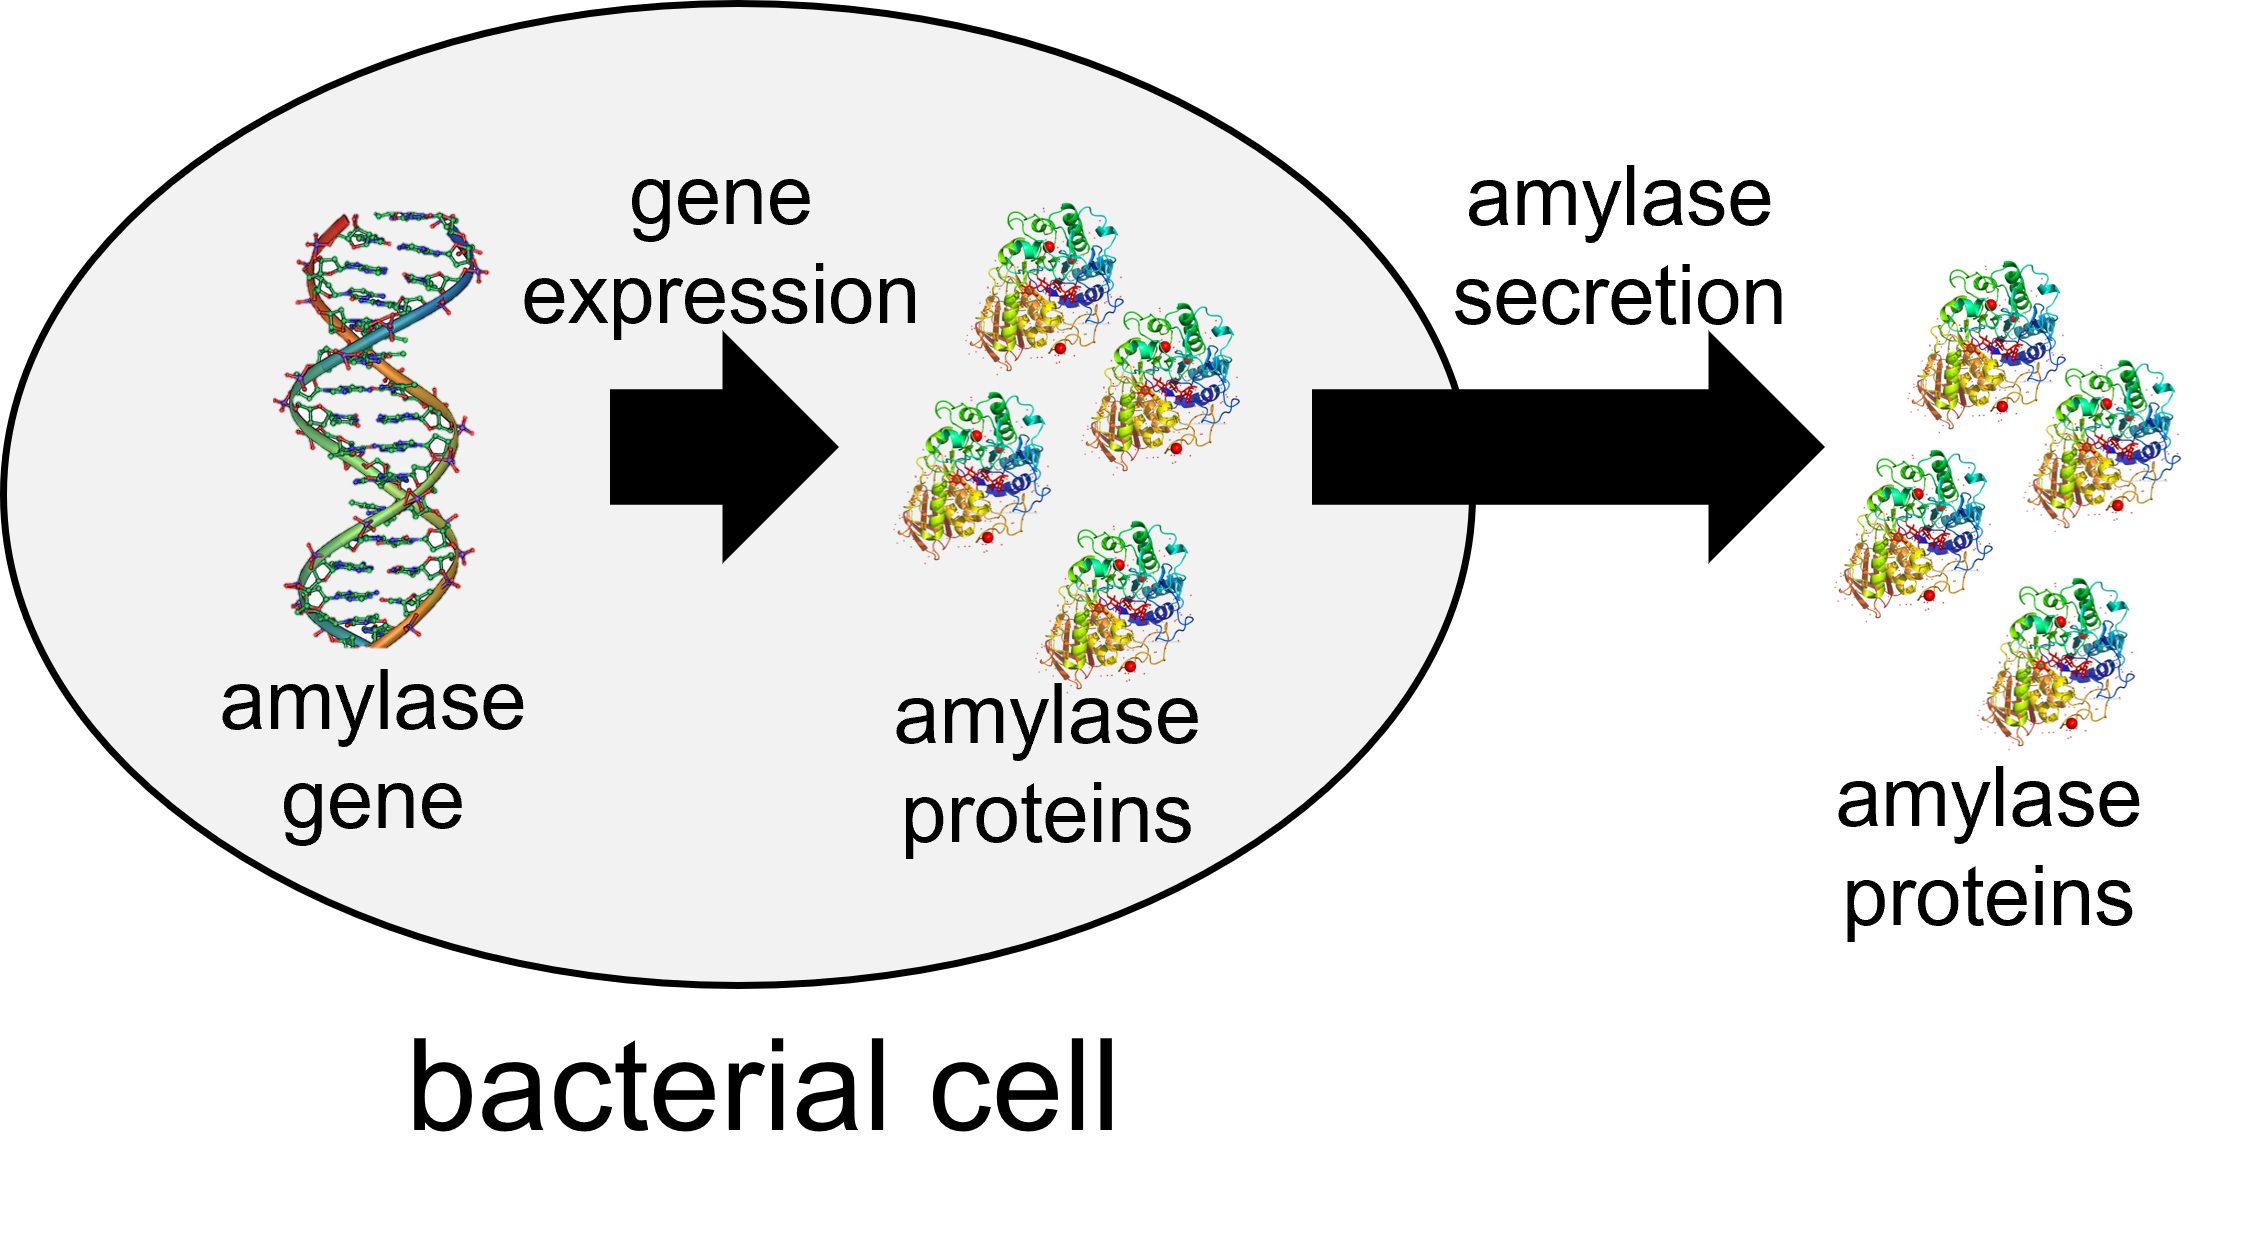 amylase production from amylase gene; amylase is excreted outside of cells